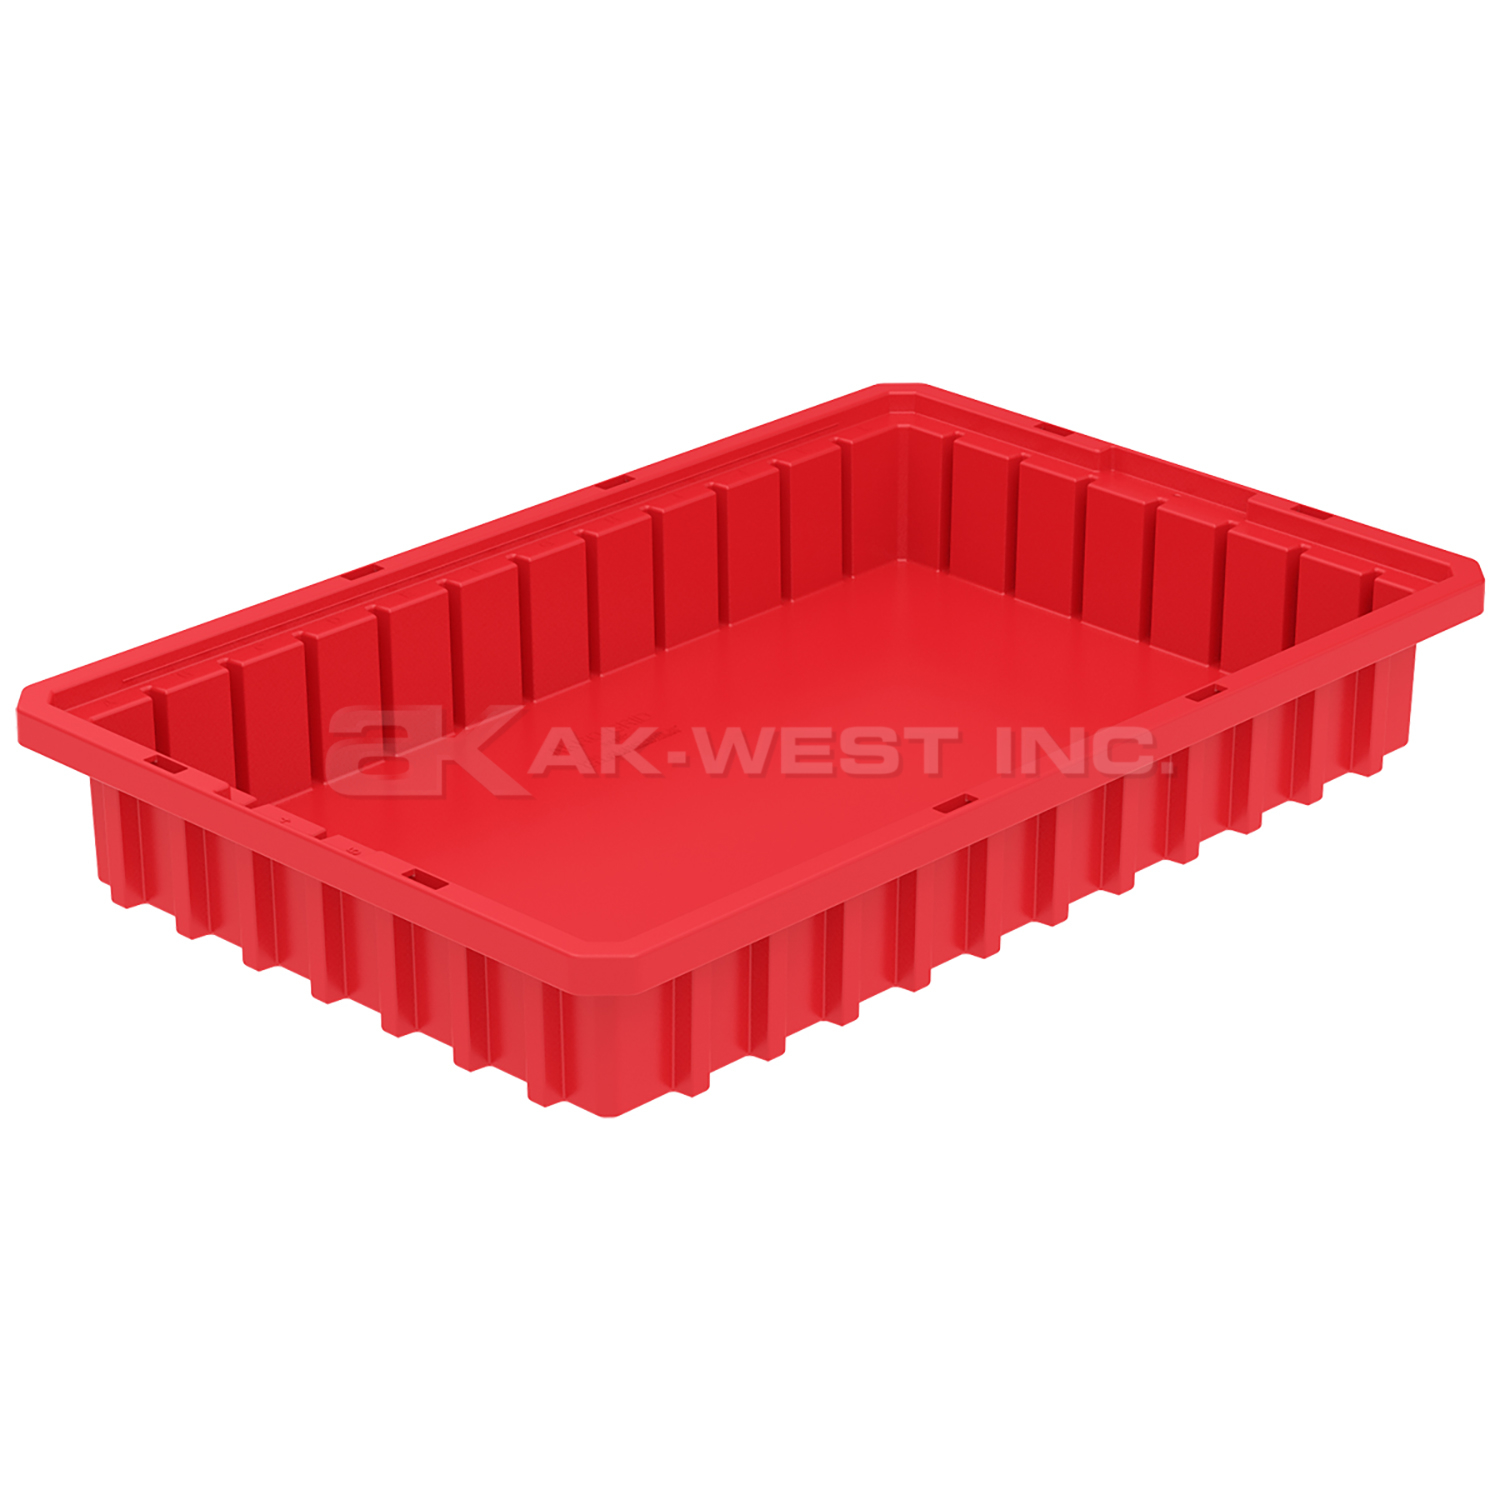 Red, 16-1/2" x 10-7/8" x 2-1/2" Dividable Grid Container (12 Per Carton)